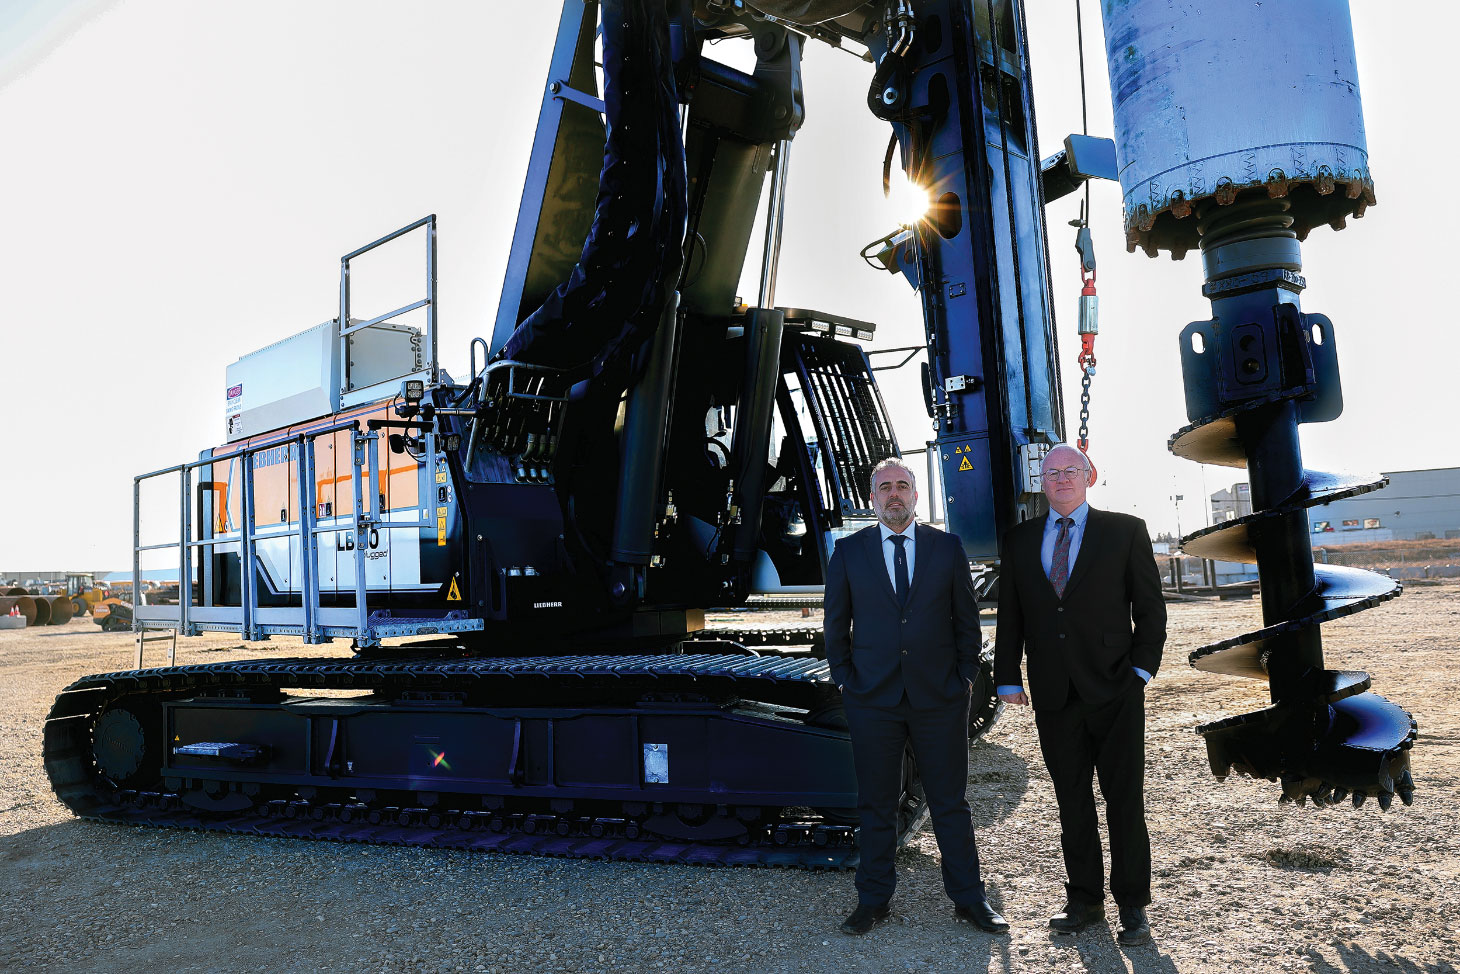 Gordon Williamson and Nixar Abou Ltaif standing in front of Liebherr LB 30 unplugged